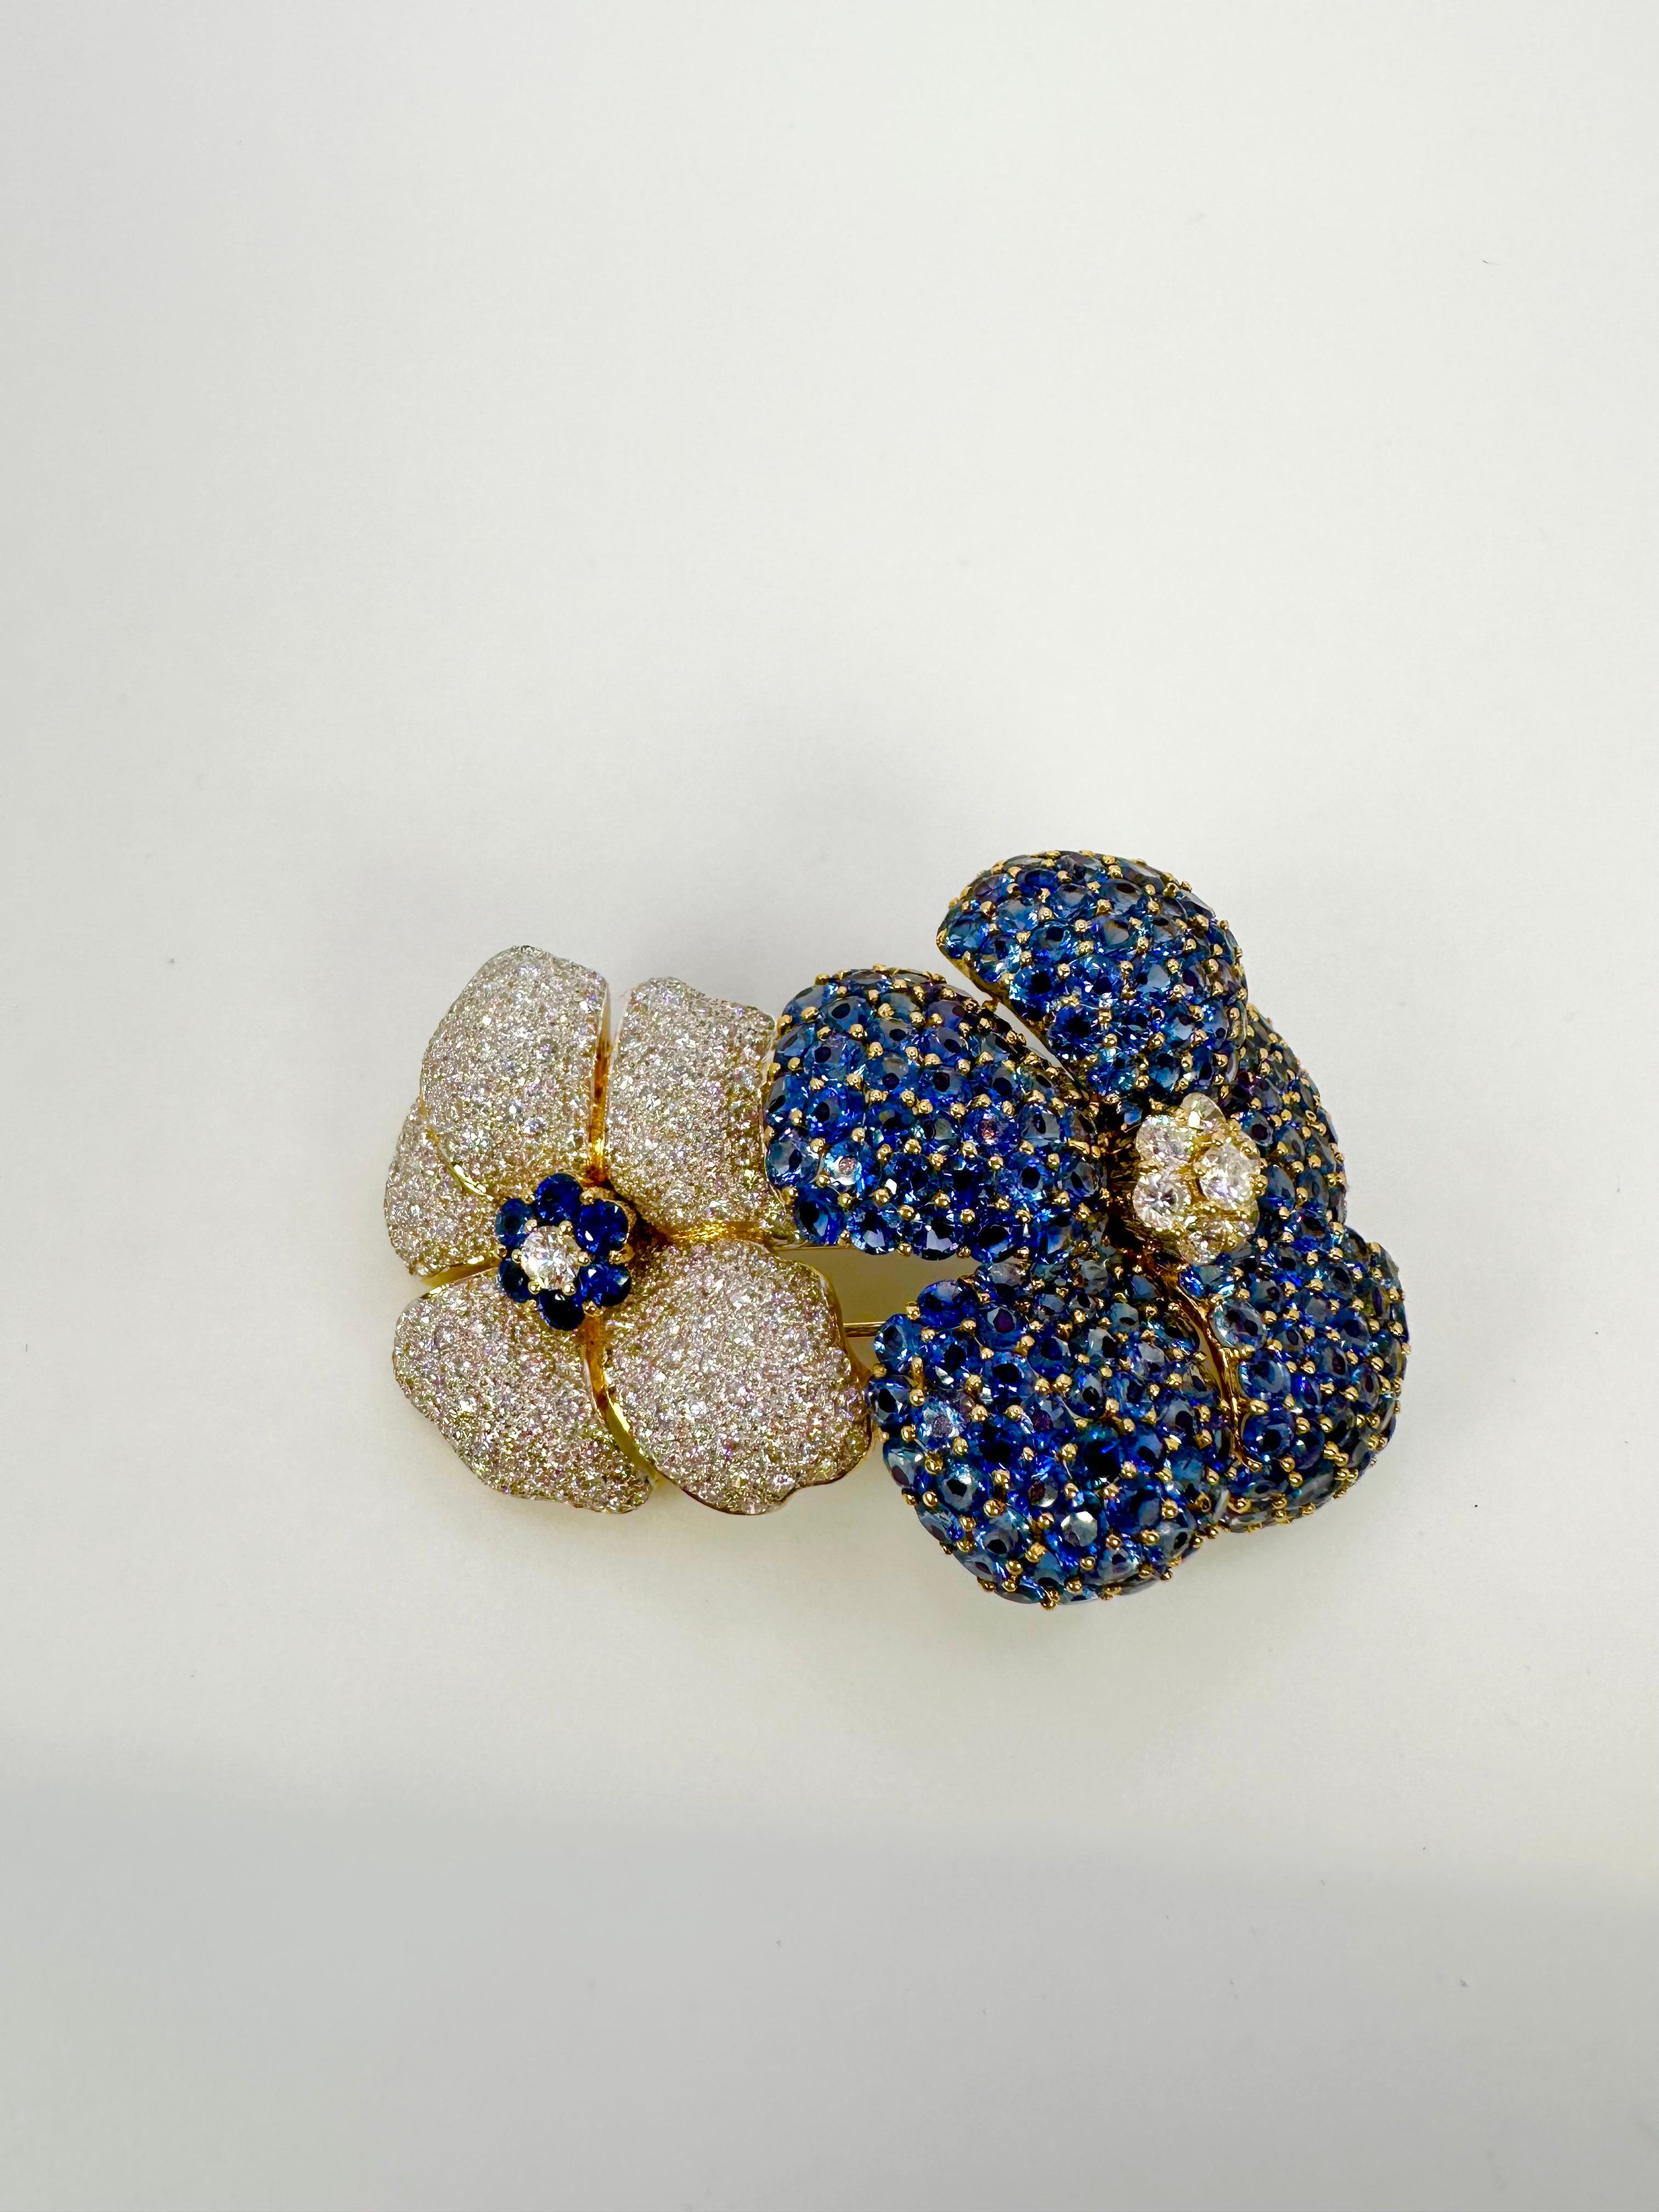 Luxurious flower brooch made with natural sapphires and diamonds in 18KT white gold. The rare setting style is called invisible setting and does not show any metal just stones. 

GRAM WEIGHT: 34.82gr
GOLD: 18KT yellow gold
SIZE: 2.30inches x 1.60